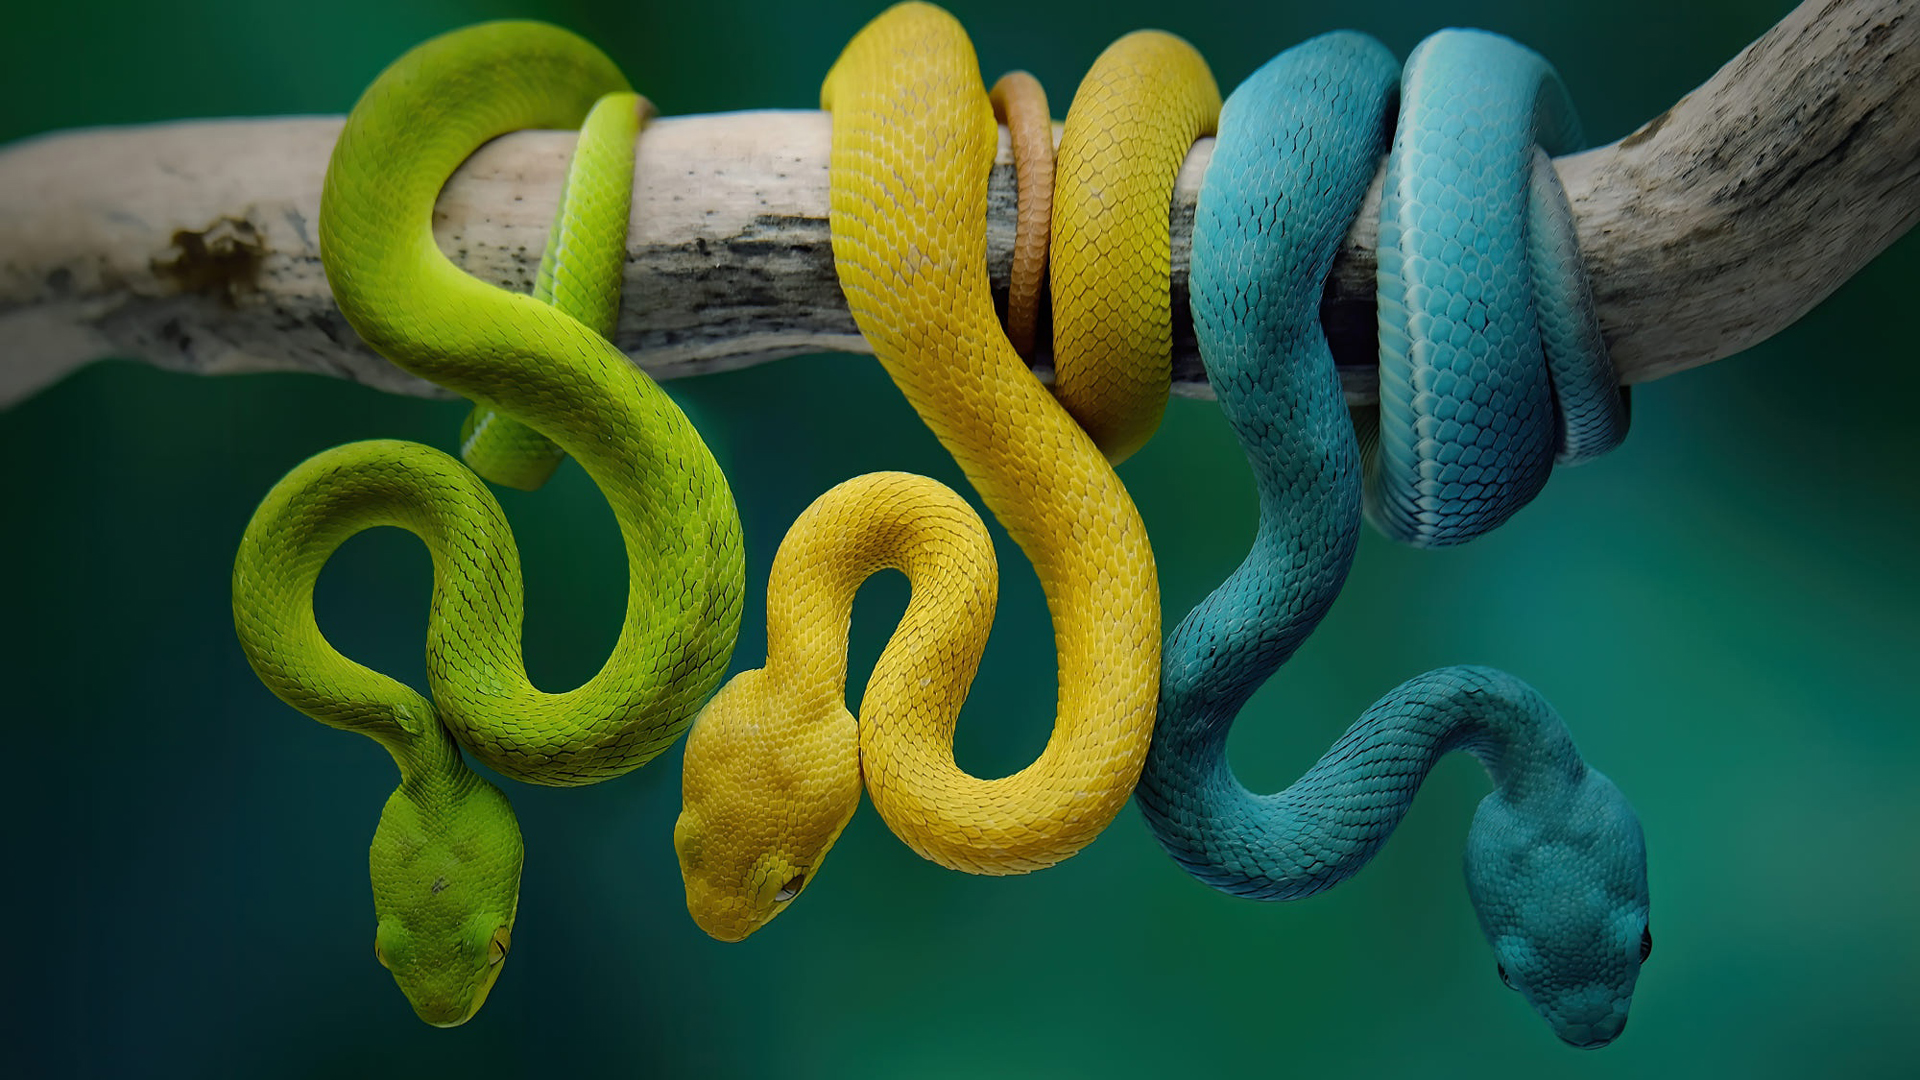 Green Yellow Blue Snakes On Tree Branch In Blur Teal Blue Wallpaper HD Snake